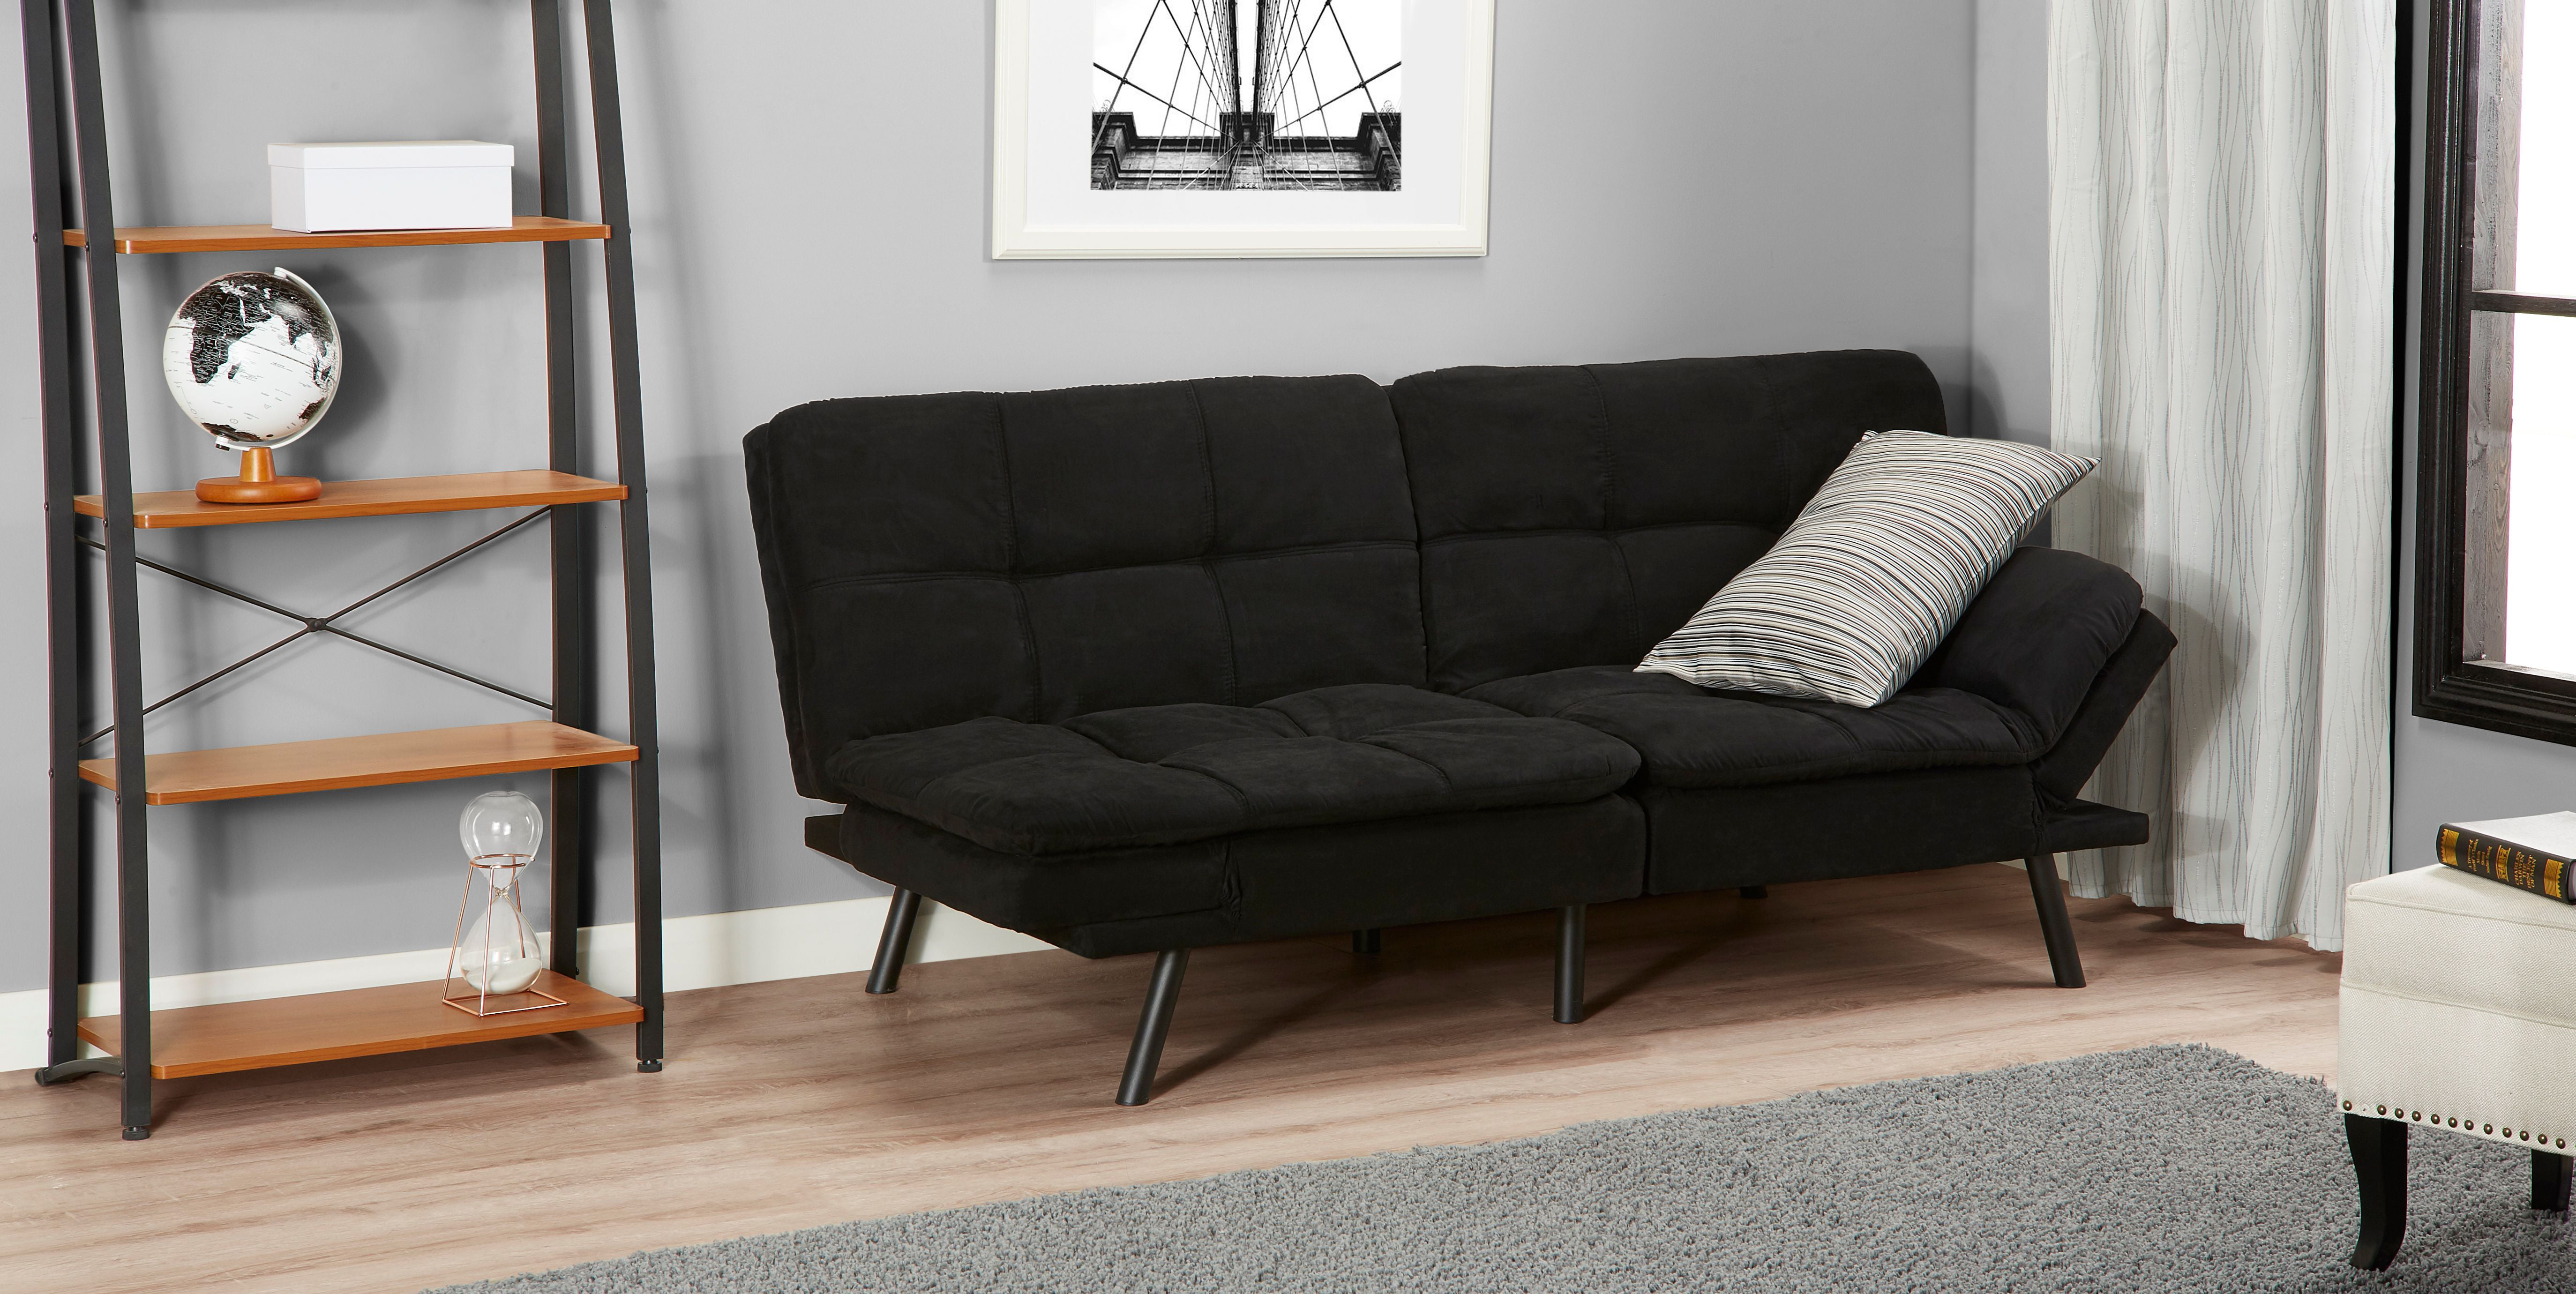 Mainstay Wooden Frame Memory Foam Split seat and Back Futon A Black Suede